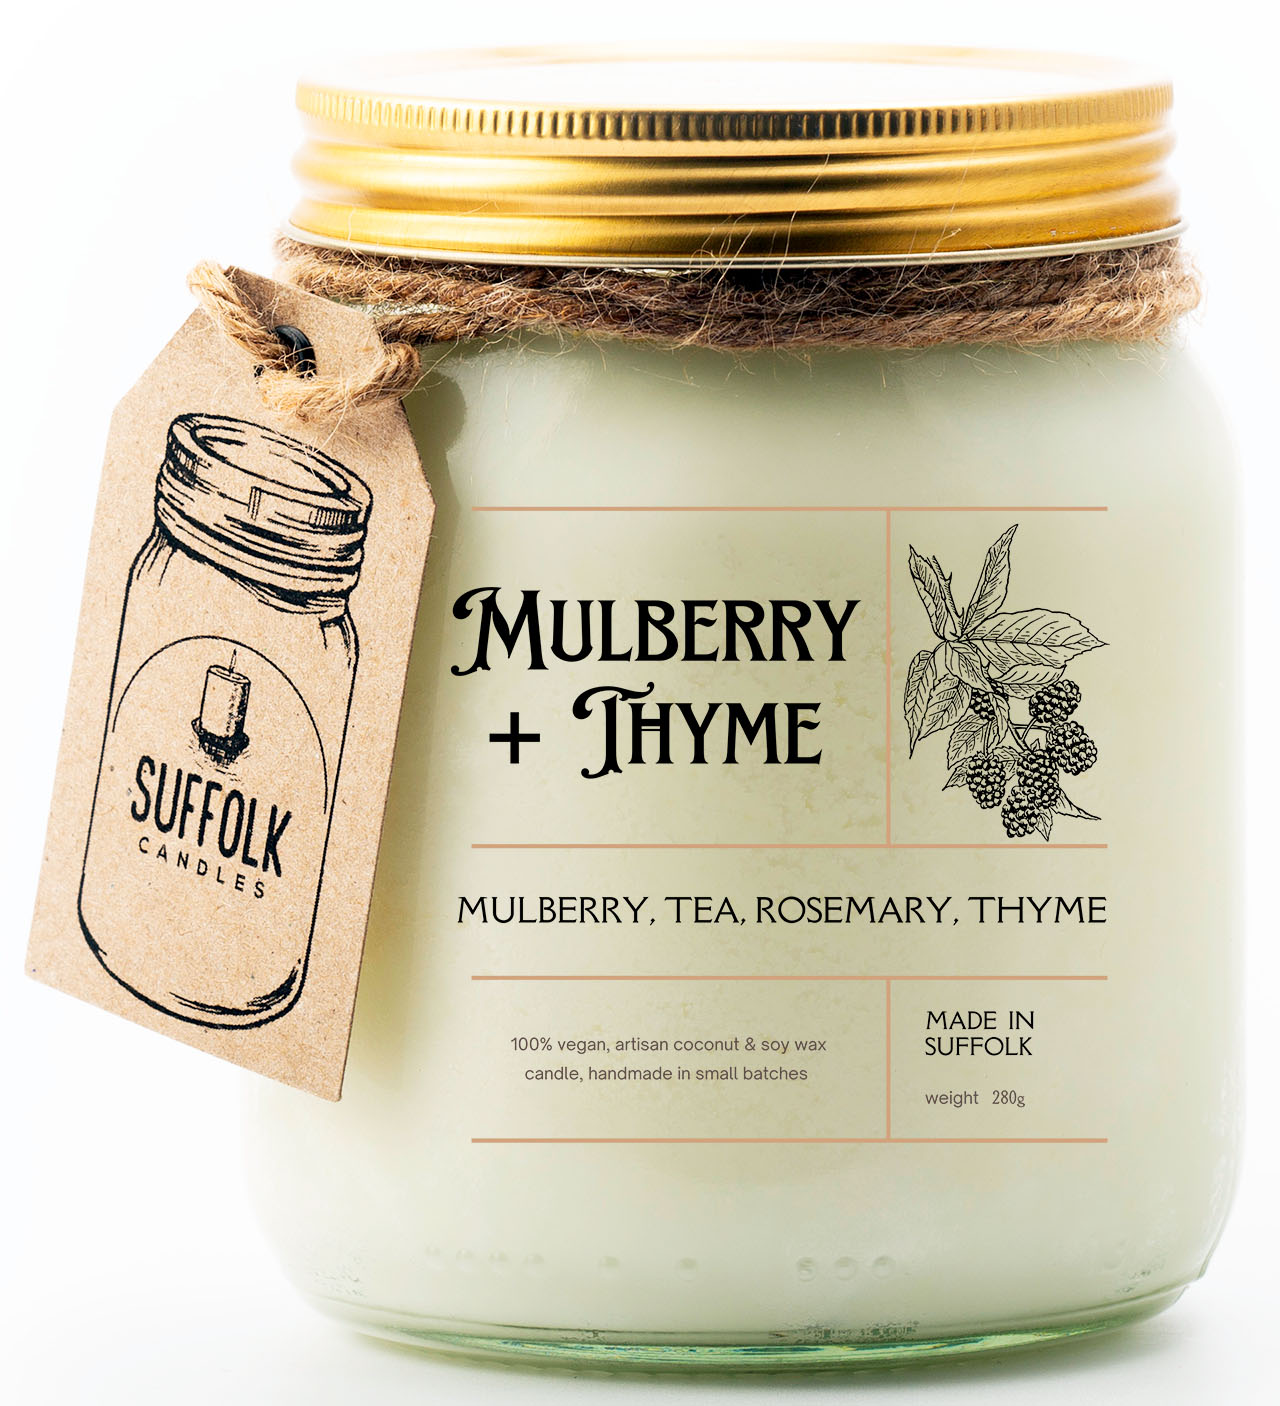 Mulberry & Thyme Fragrance Scented Candle | Rosemary, Mimosa, Musk & Jasmine